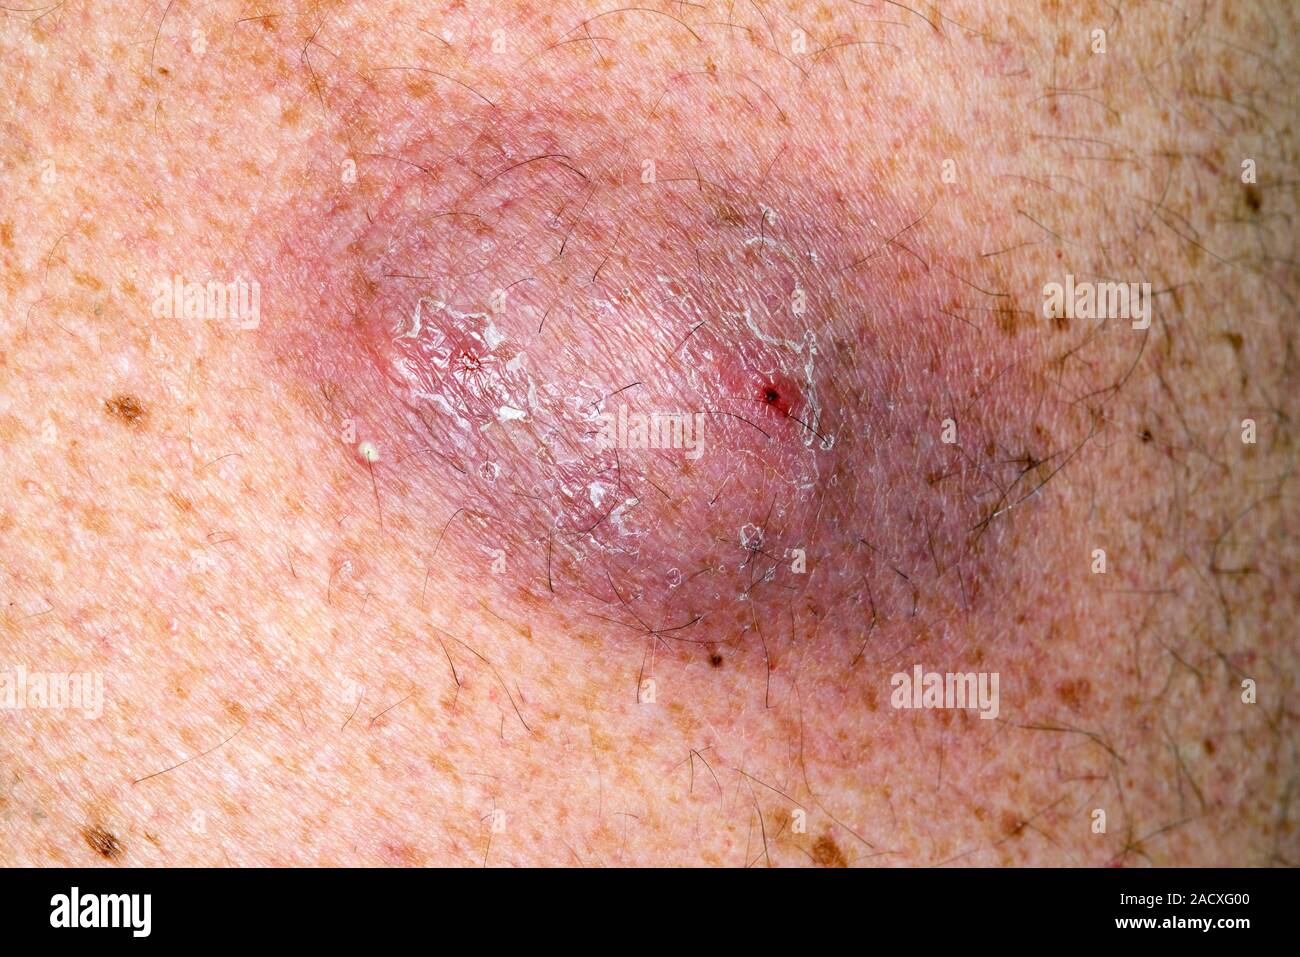 Close Up Of Infected Sebaceous Cyst On The Back Of A 54 Year Old Male